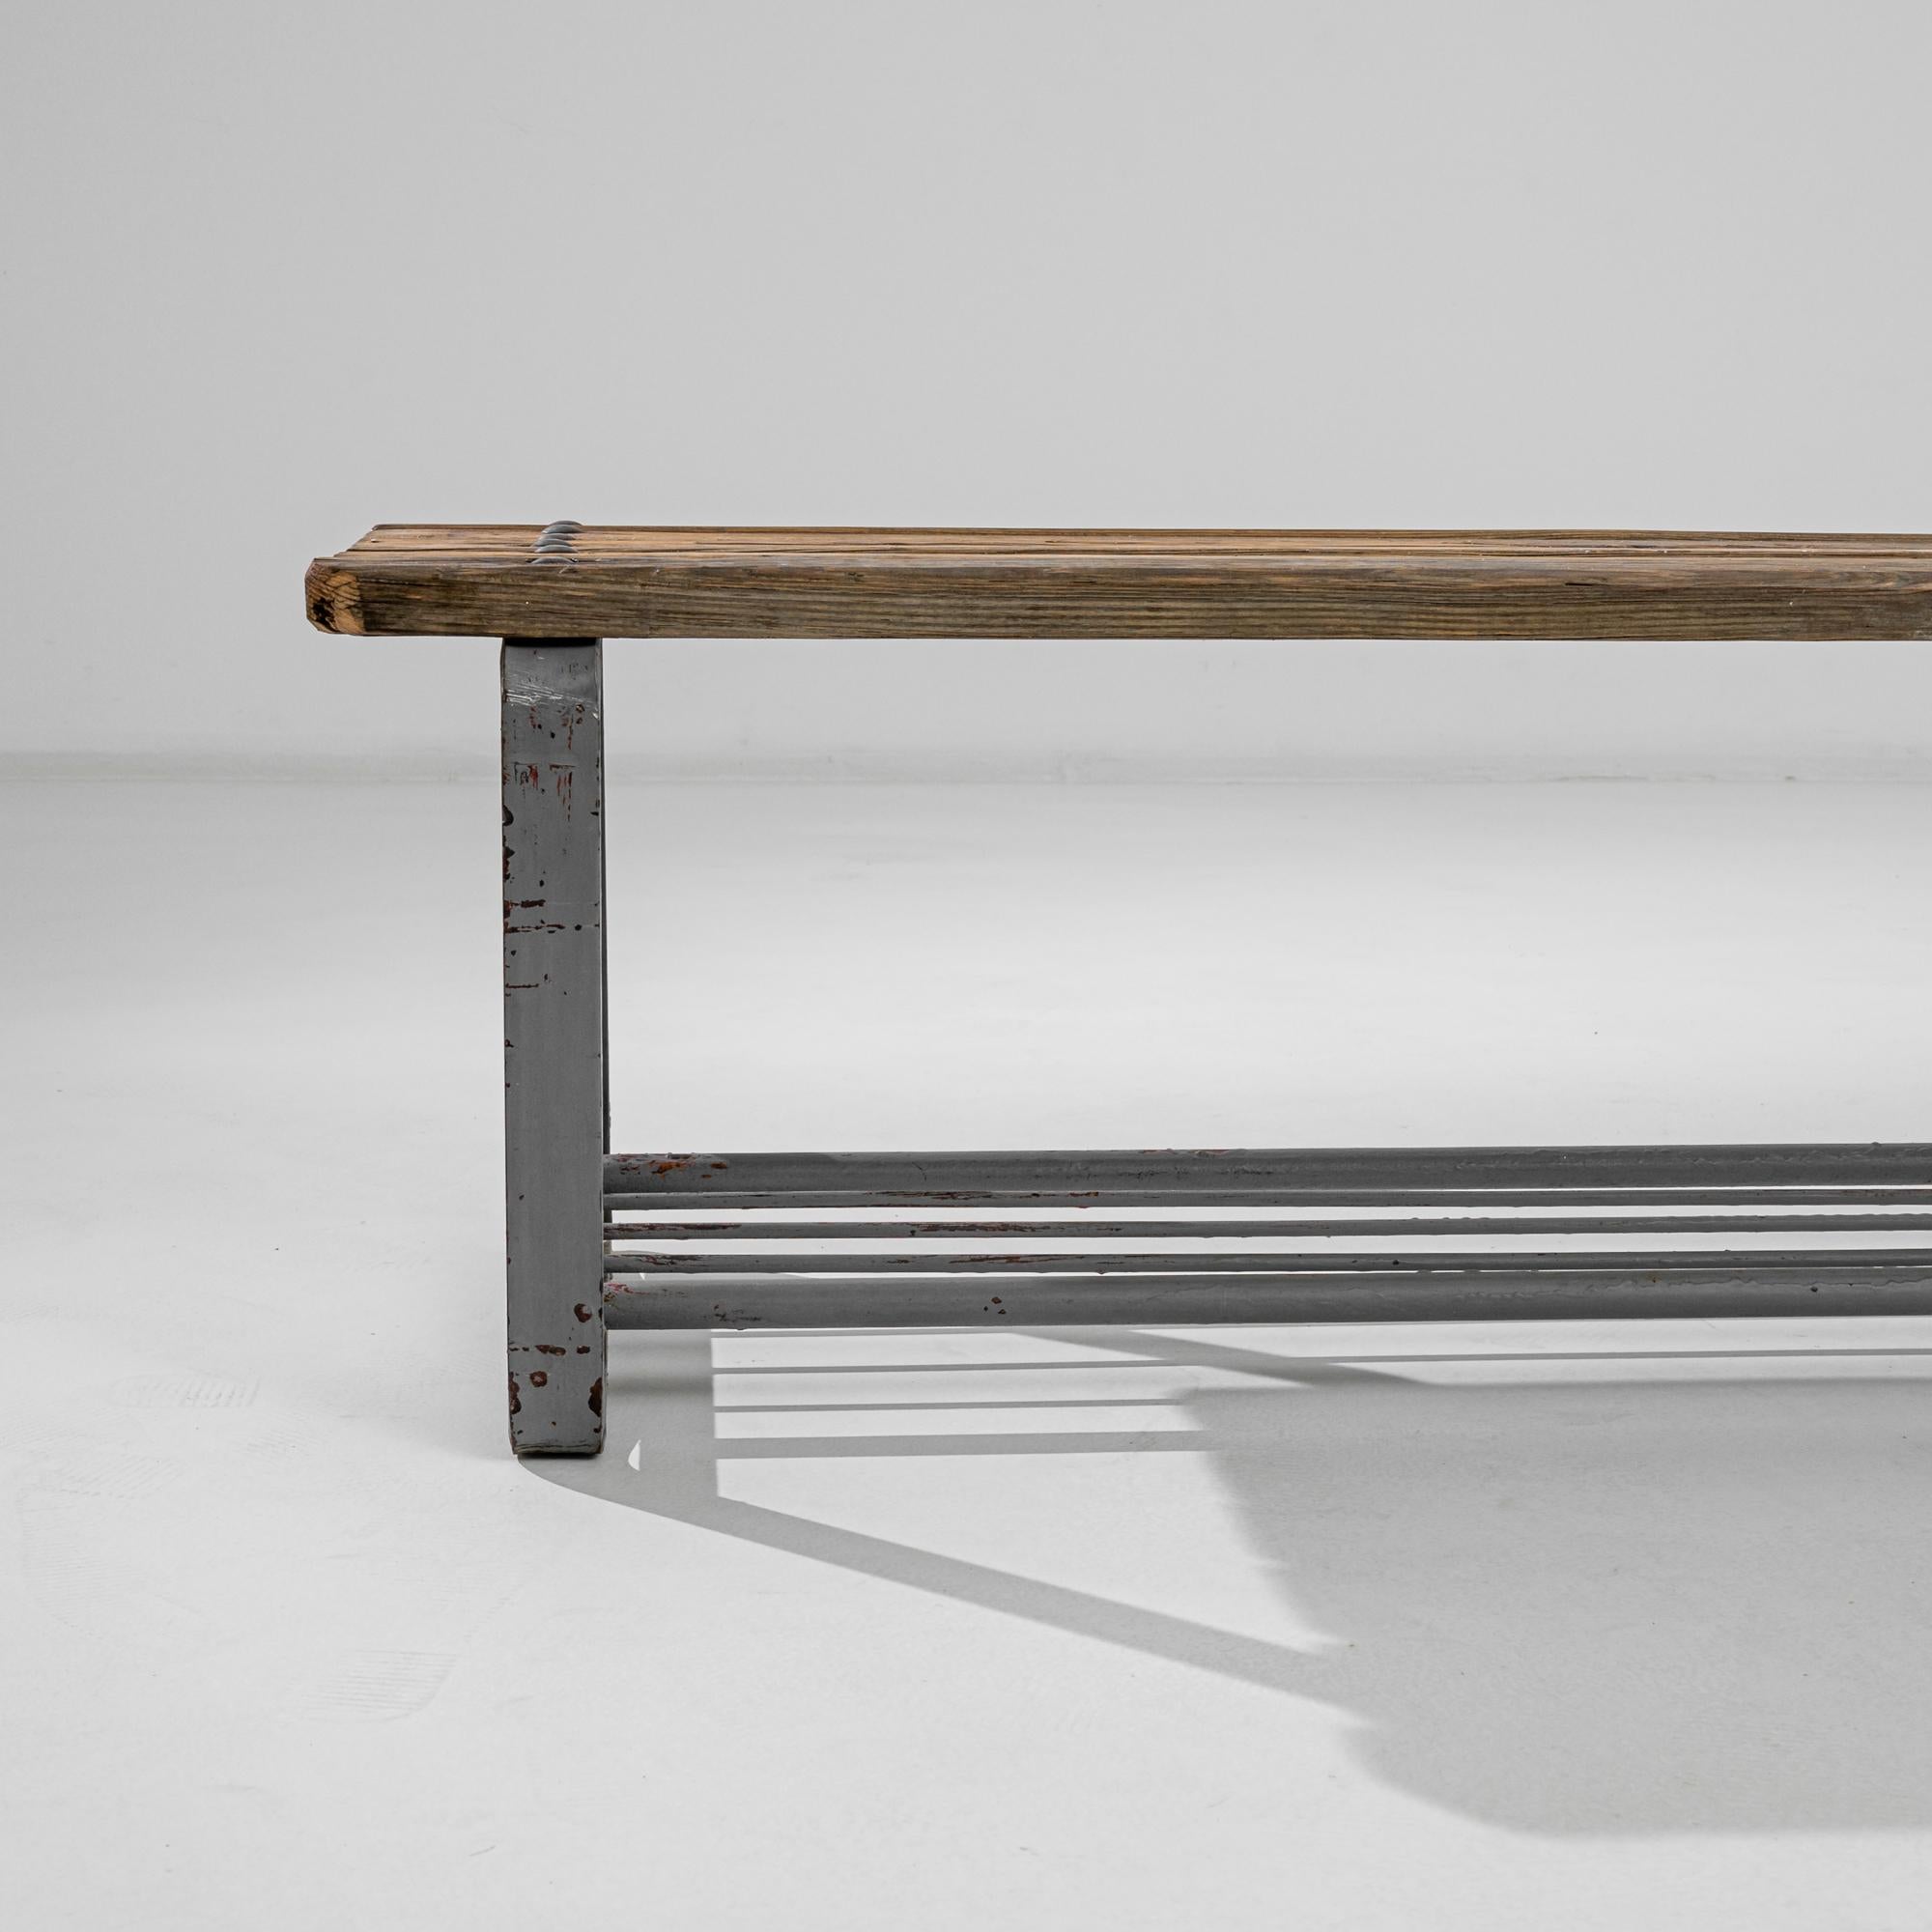 Mid-20th Century Vintage Industrial Bench from Central Europe